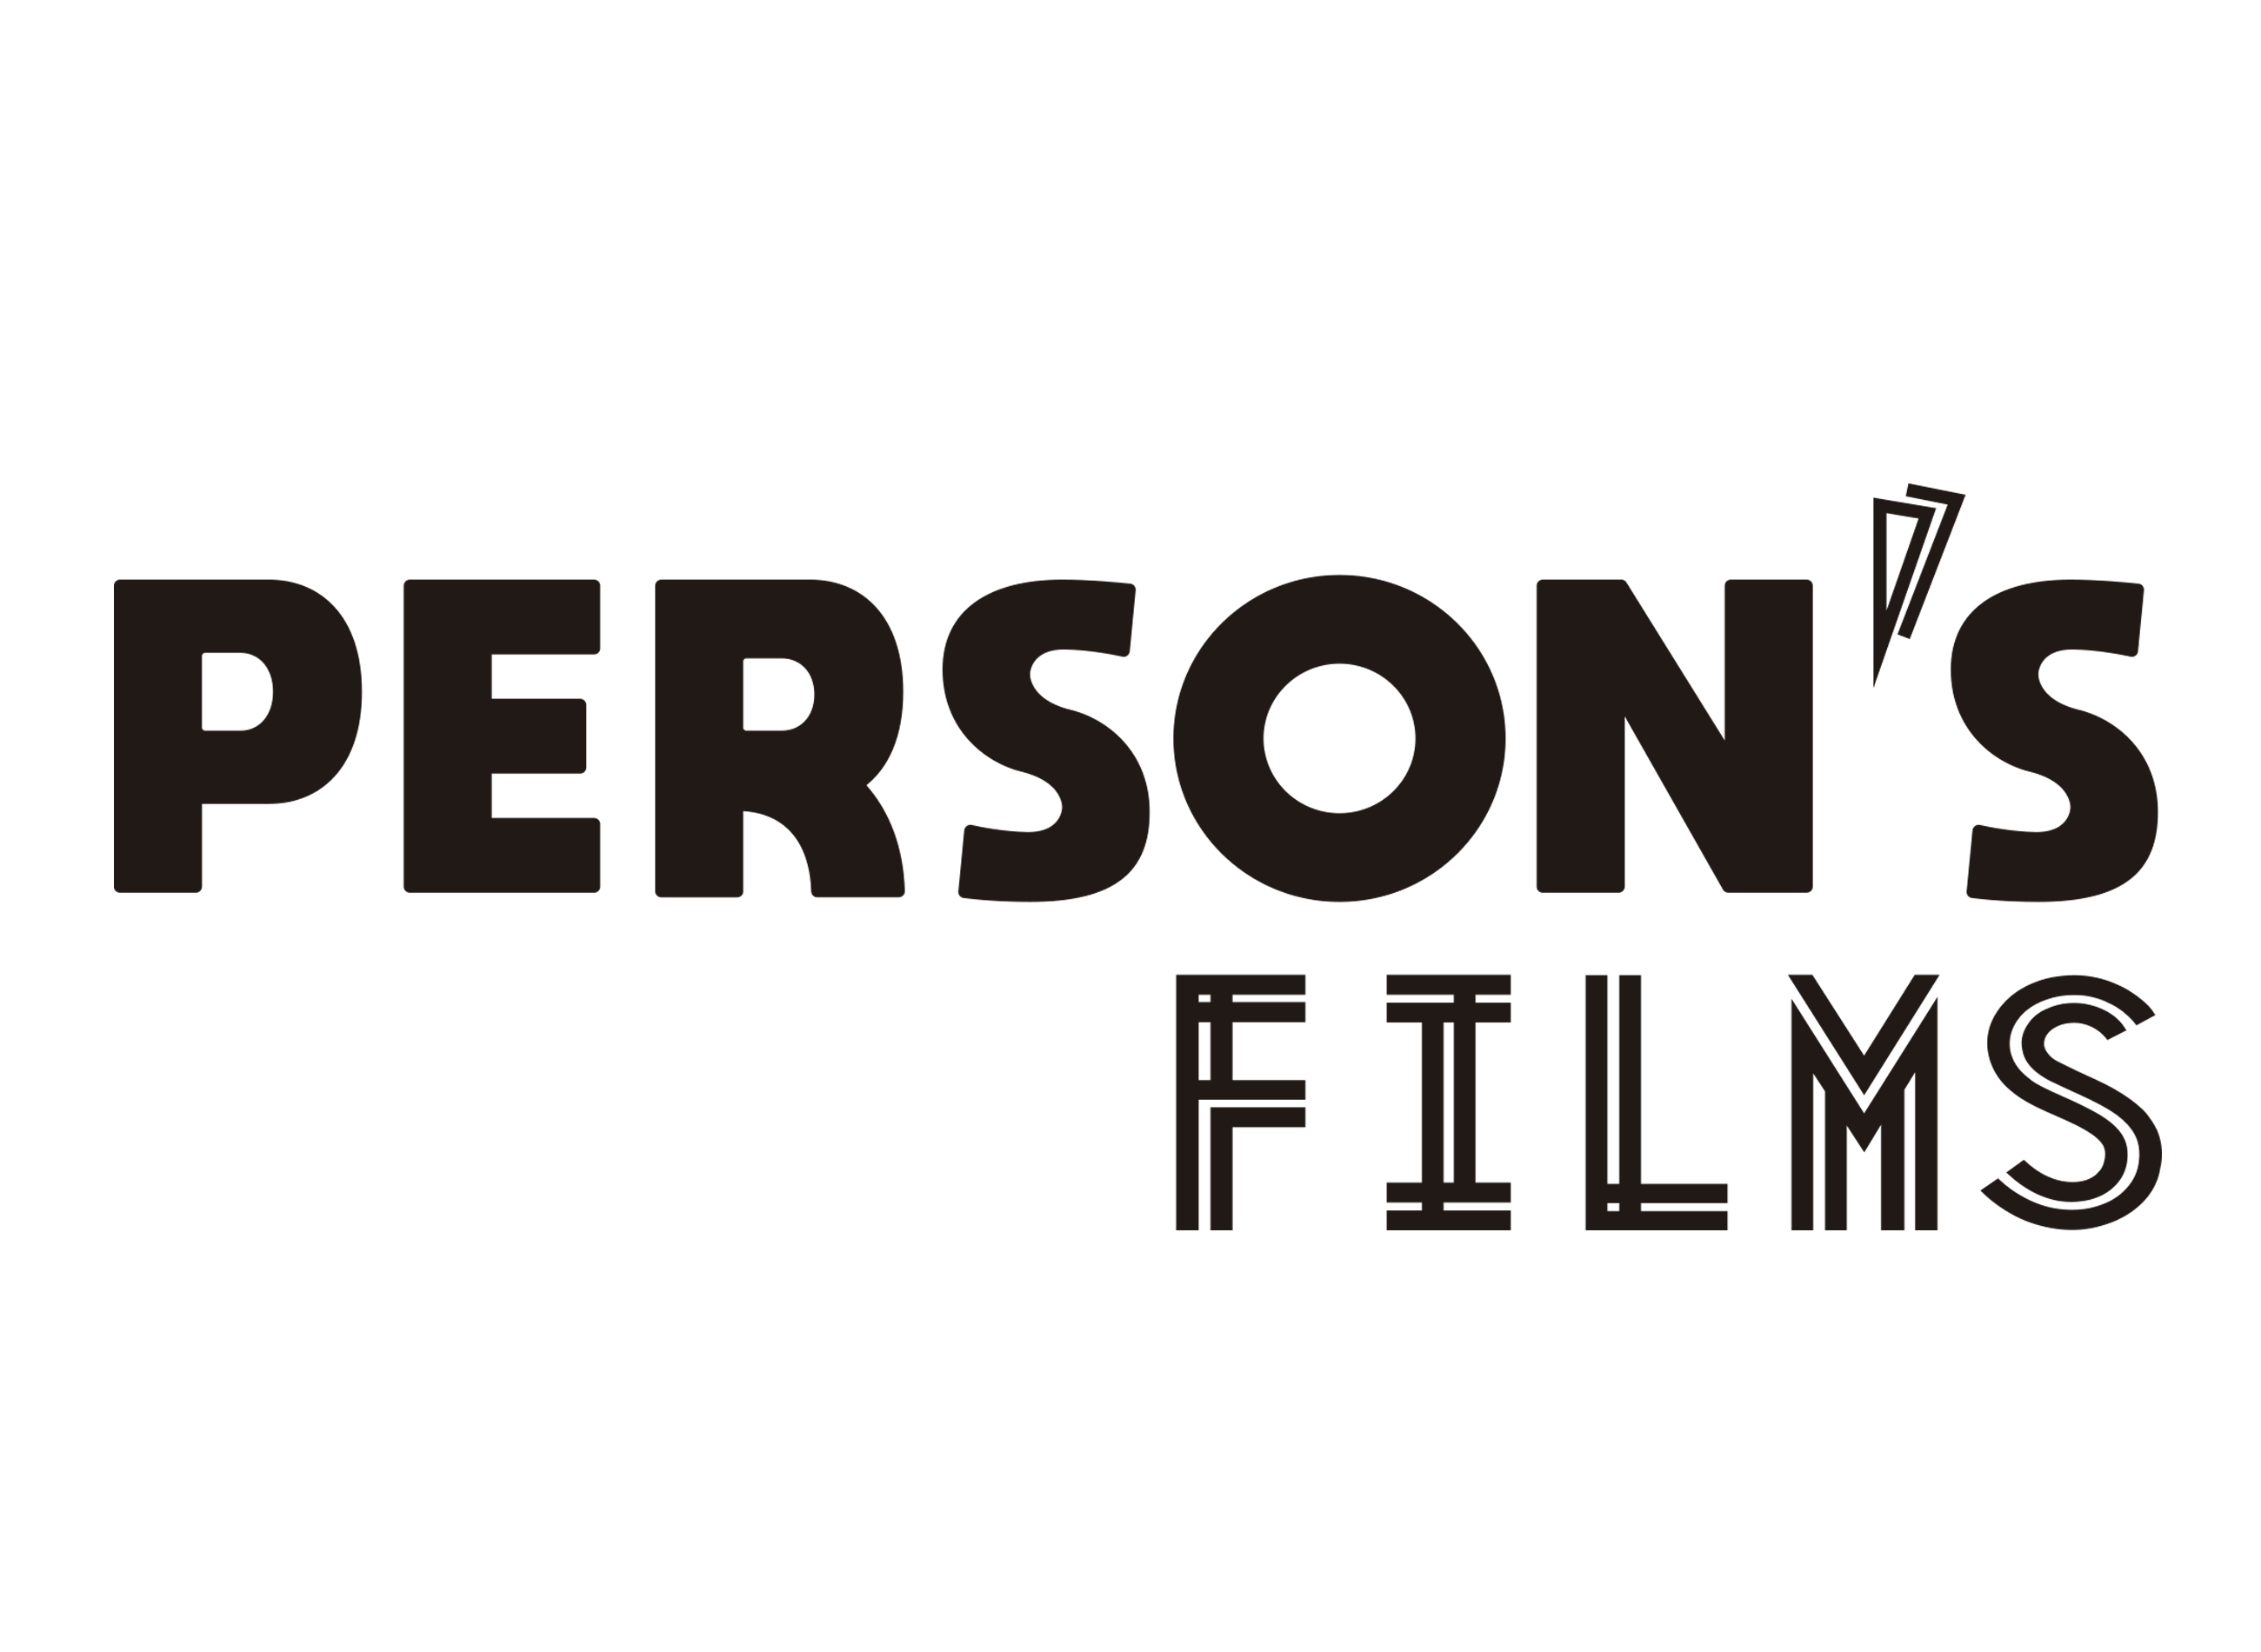 persons